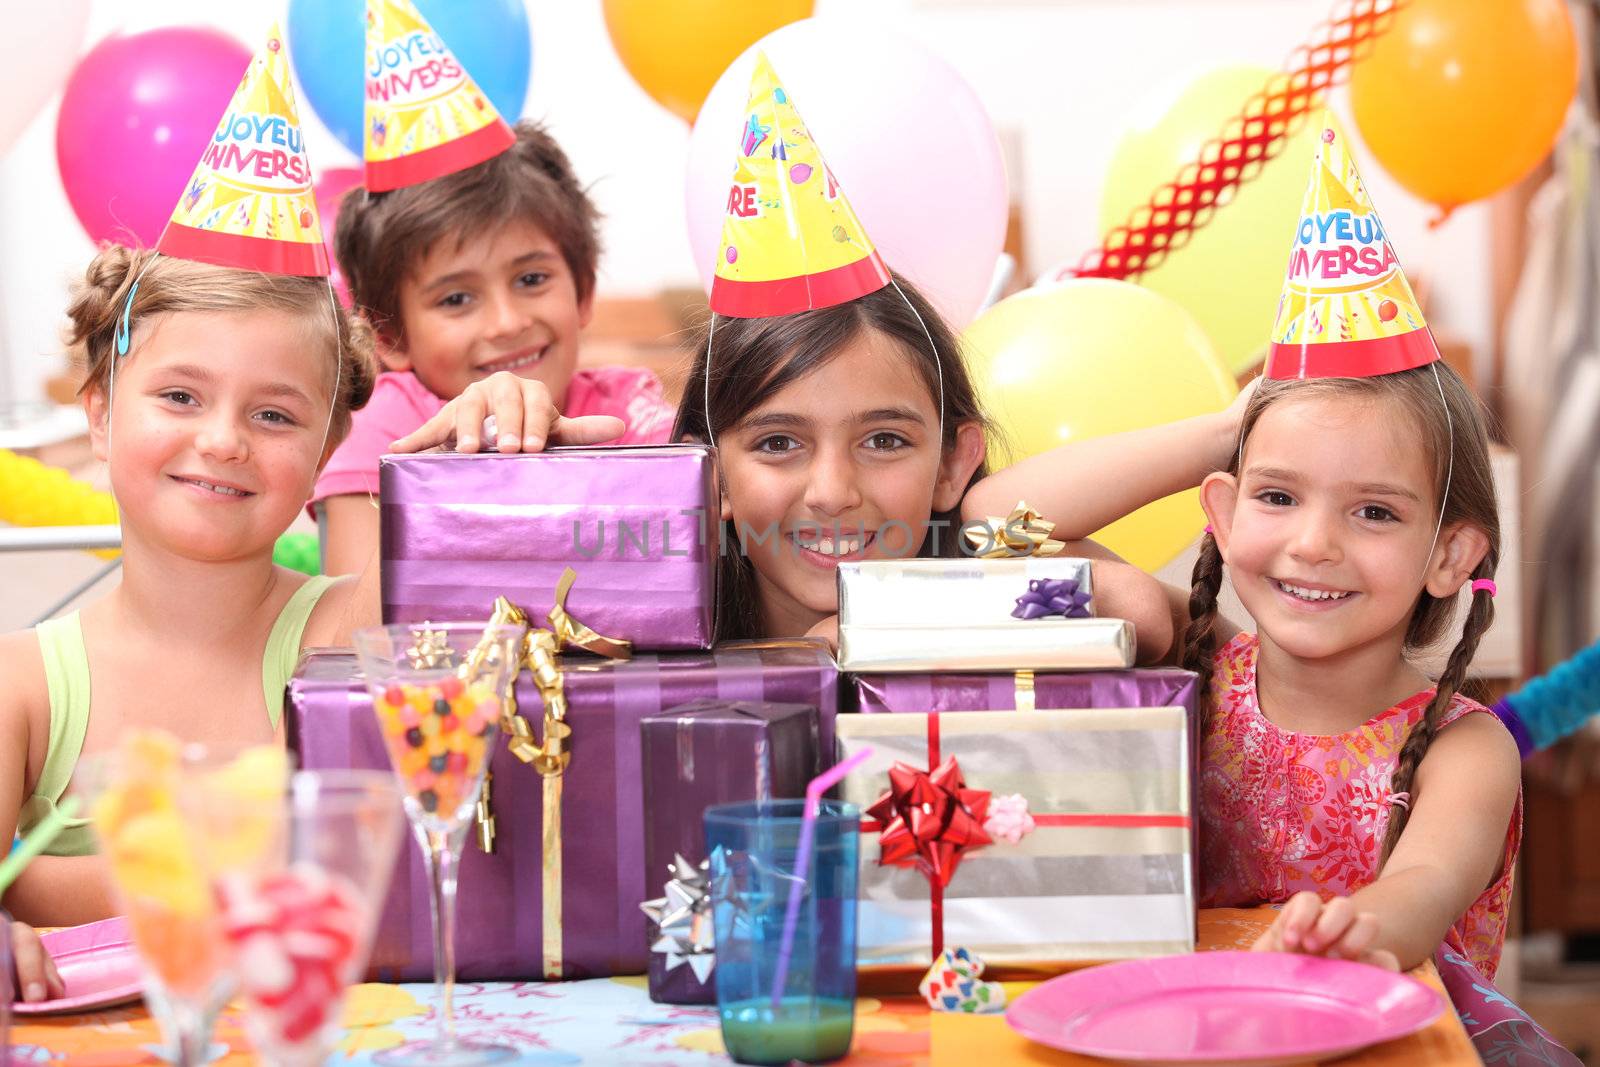 Kids birthday party by phovoir